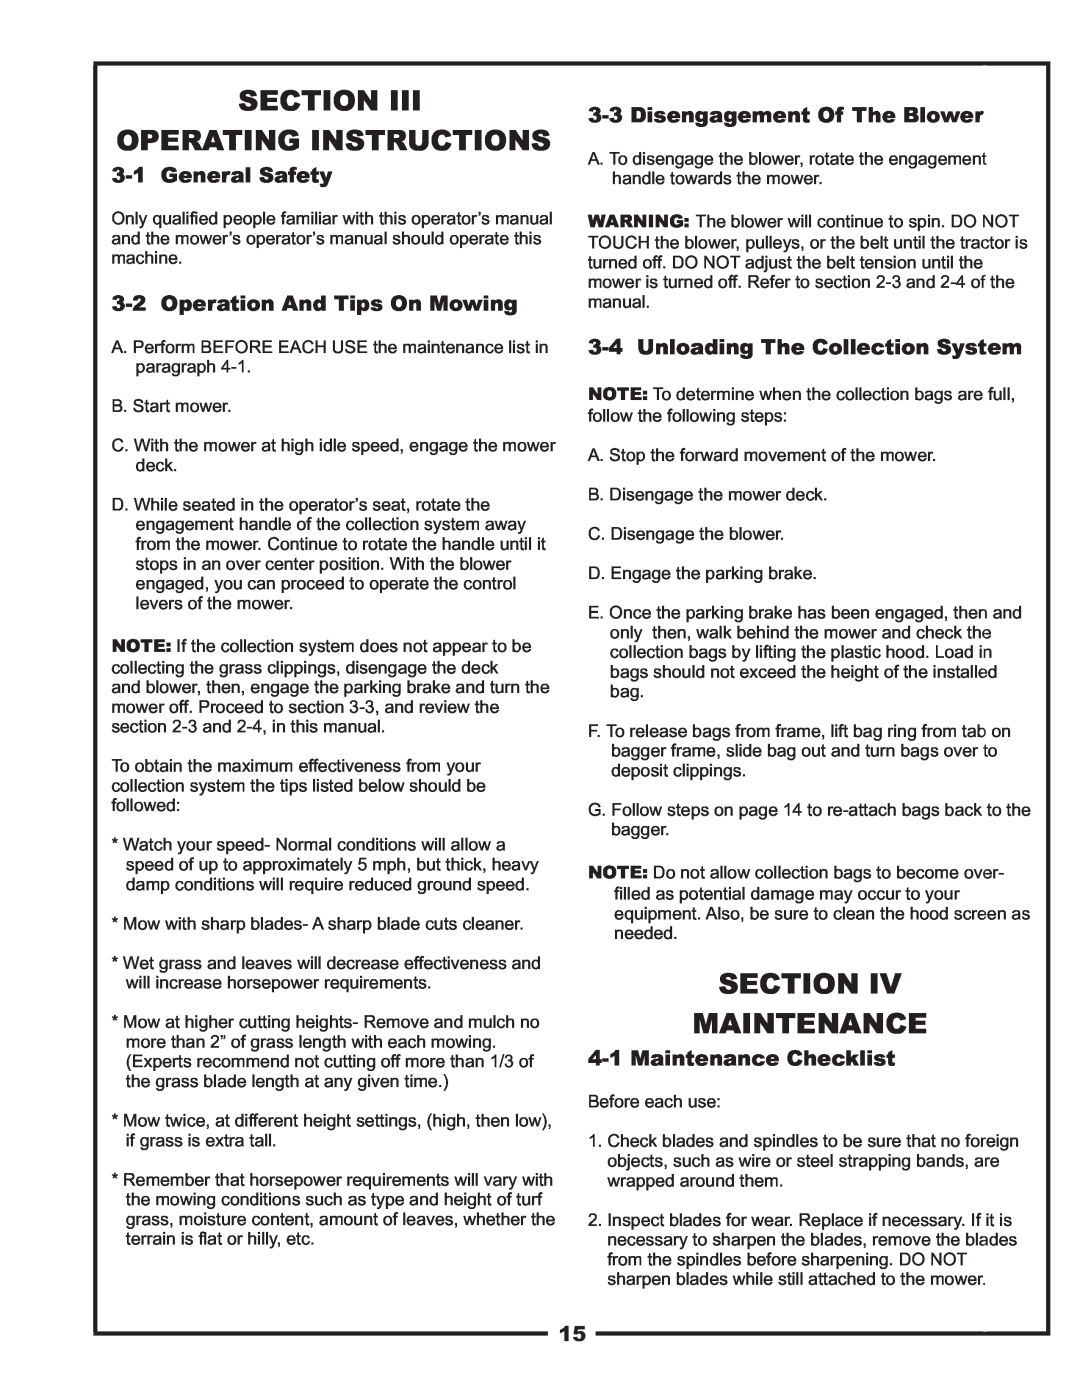 Bad Boy Mowers PUP Series Section Operating Instructions, Section Maintenance, General Safety, Disengagement Of The Blower 